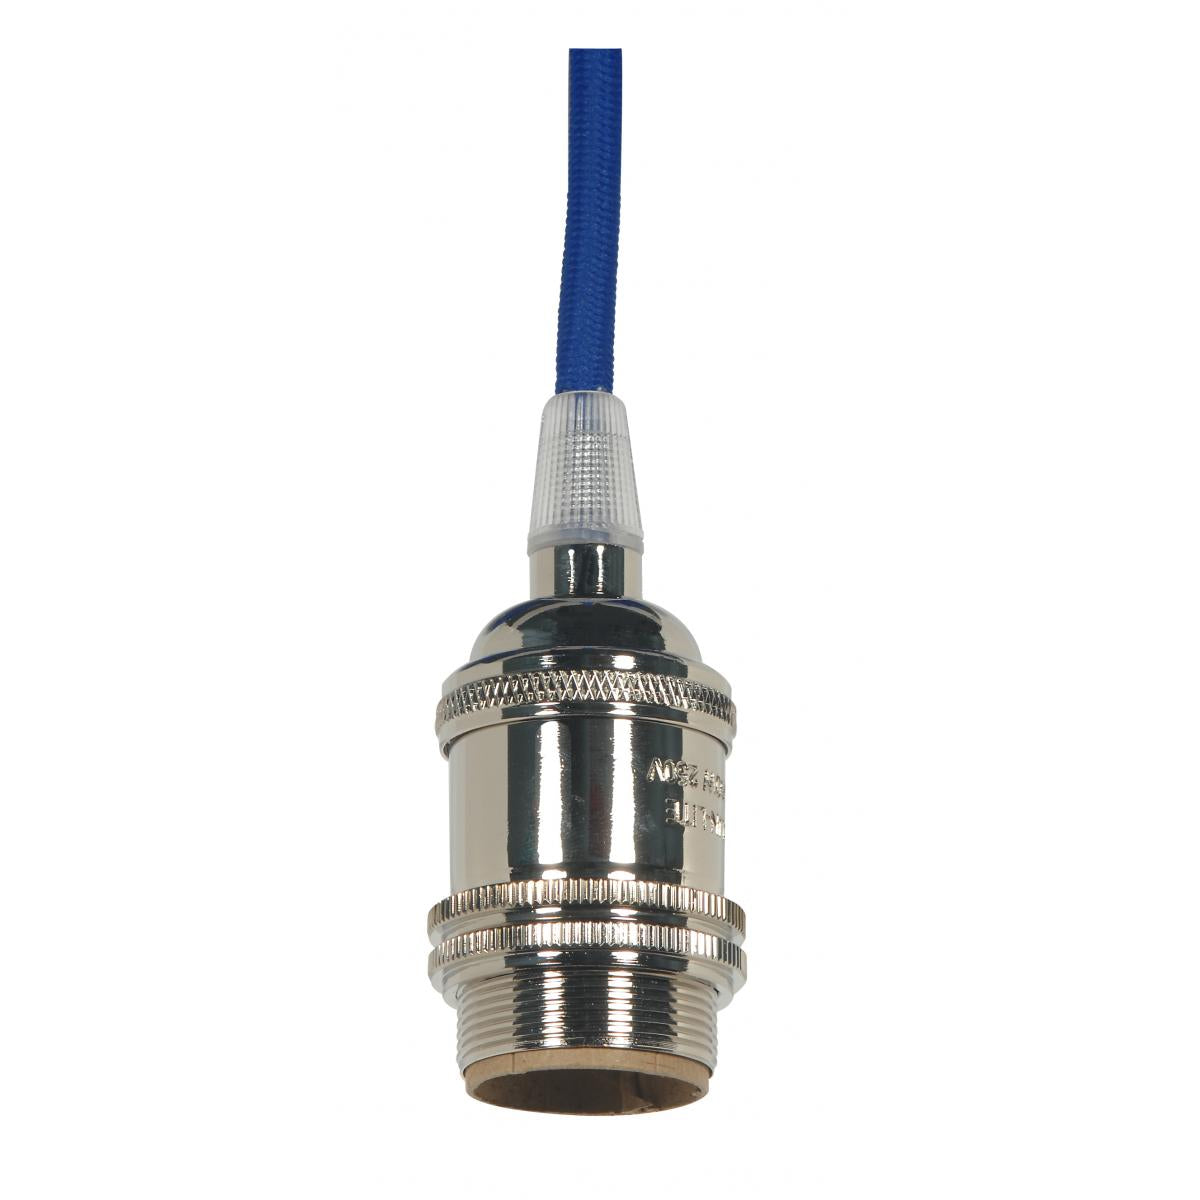 Satco 80-2454 Medium base lampholder 4pc. Solid brass prewired Uno ring 10ft. 18/2 SVT Blue Cord Polished Nickel finish